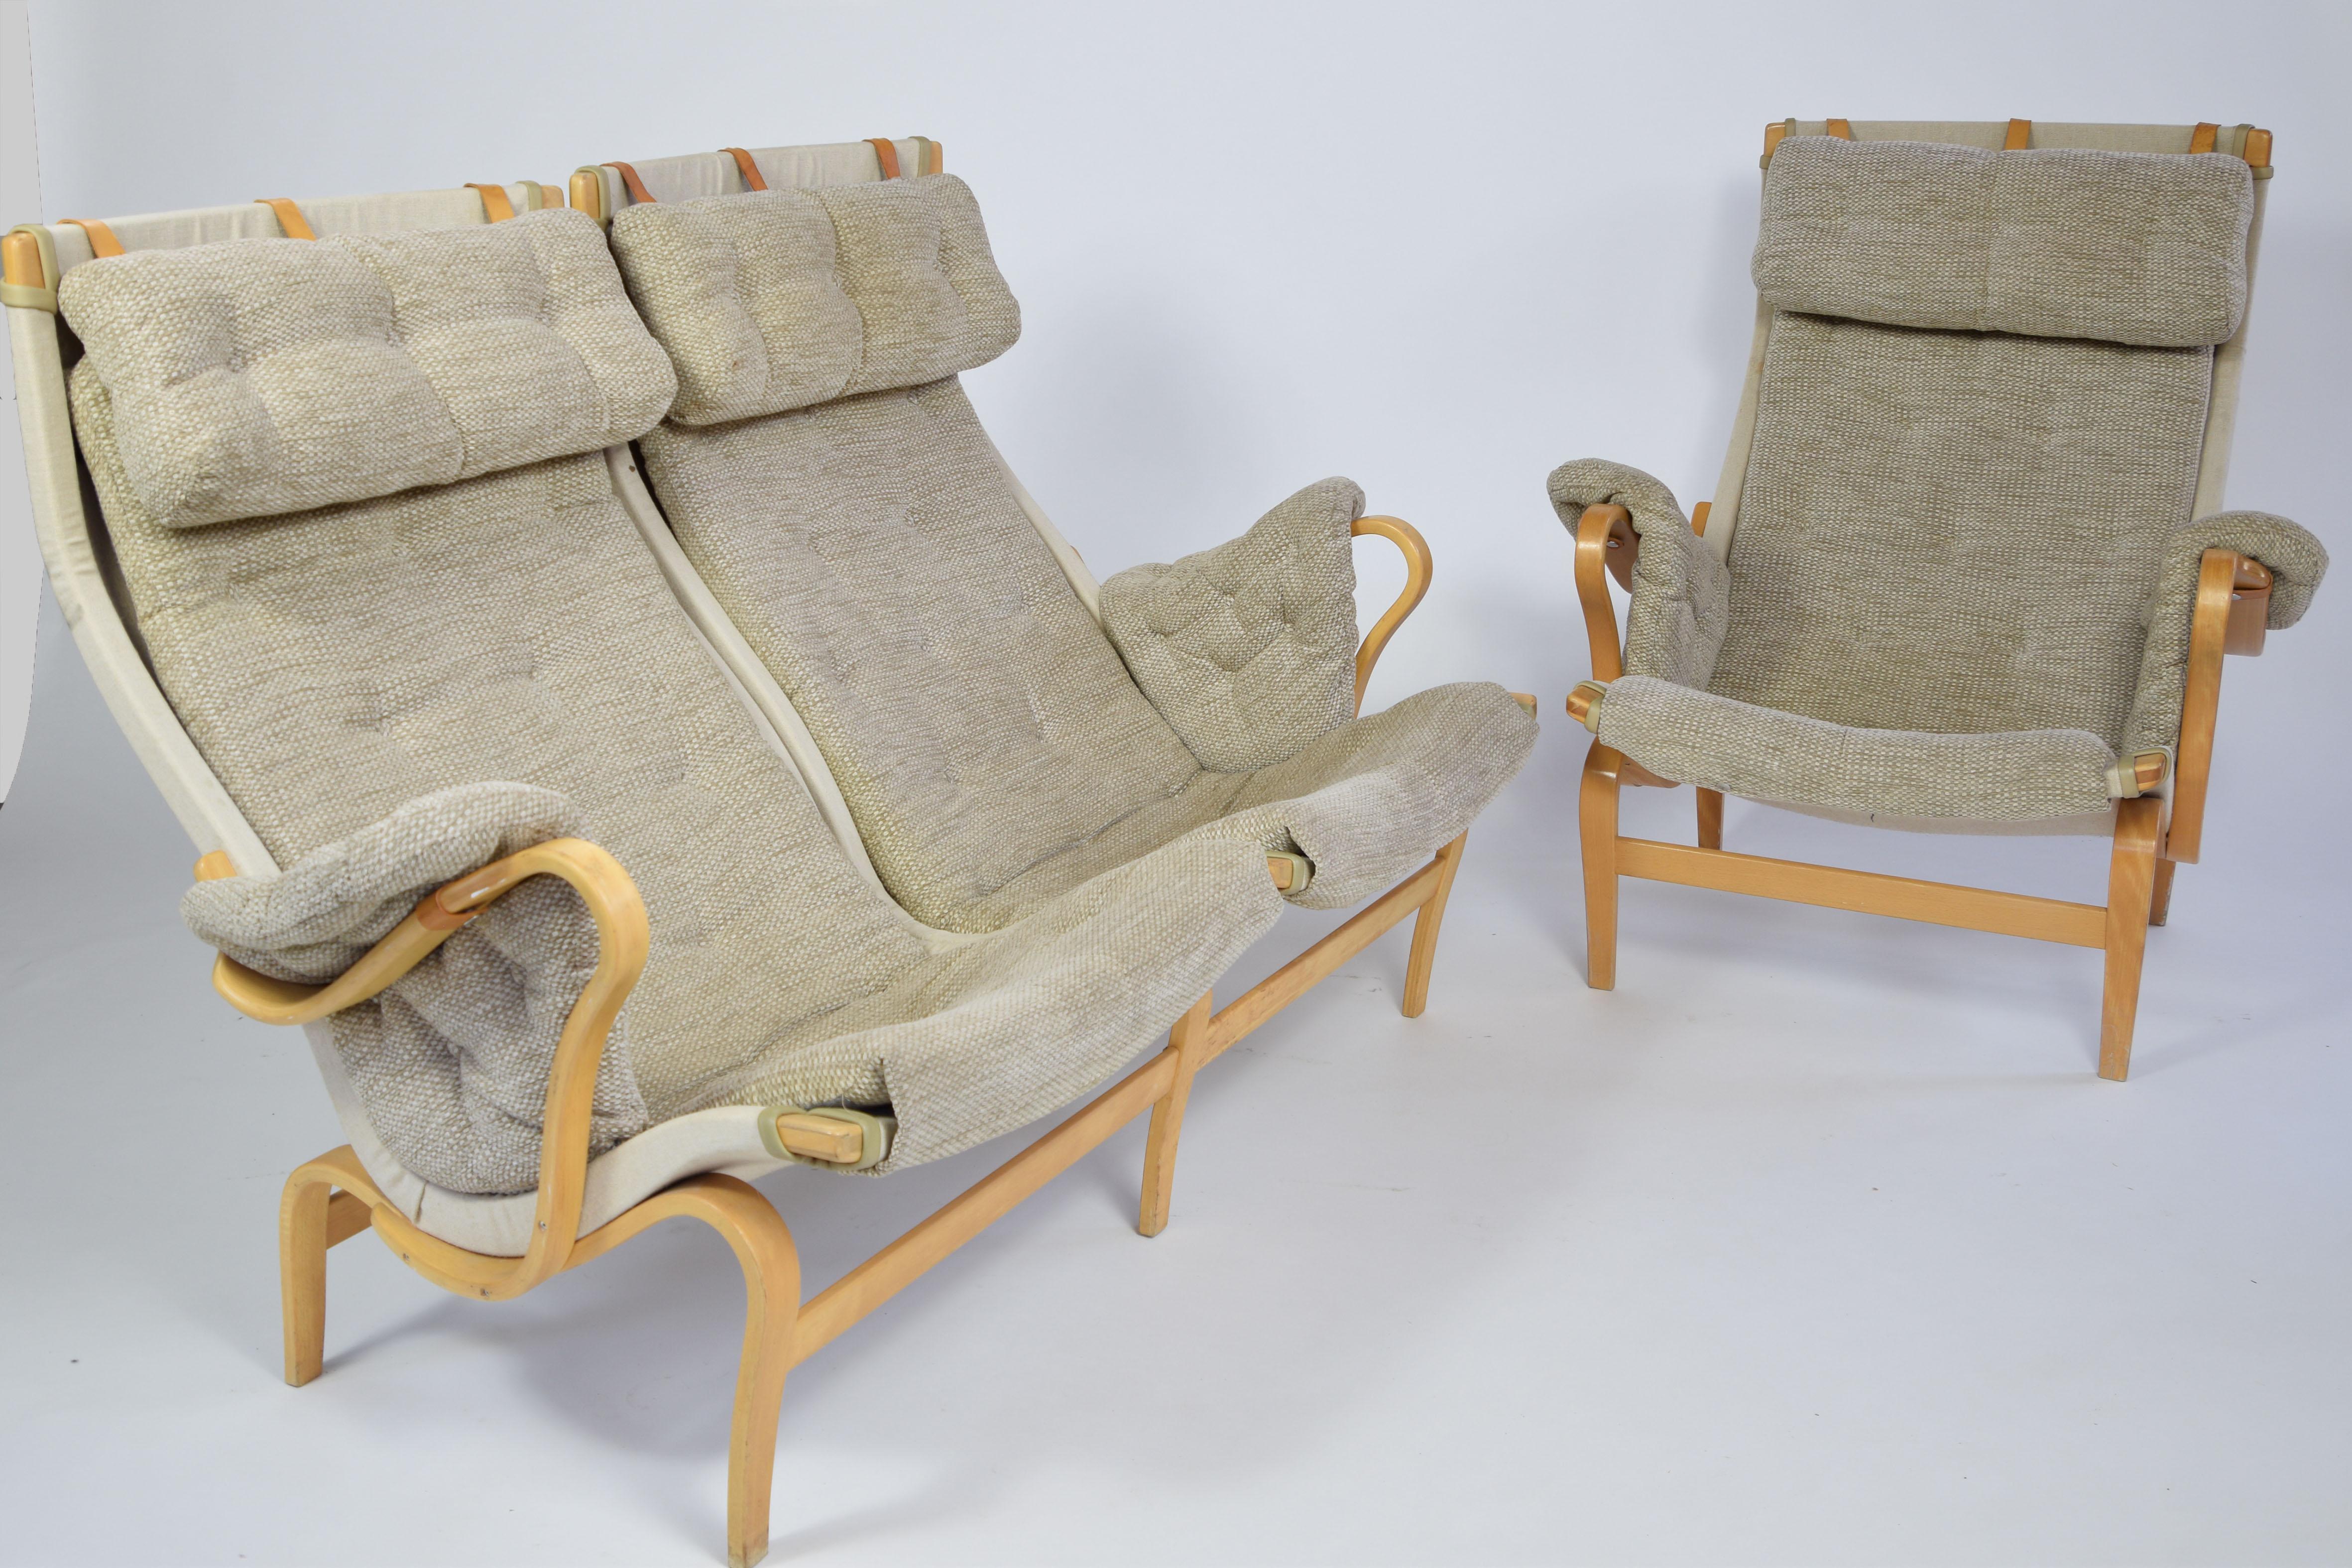 Molded Bruno Mathssons Pernilla Settee with Matching Chair, Sweden, 1970s For Sale